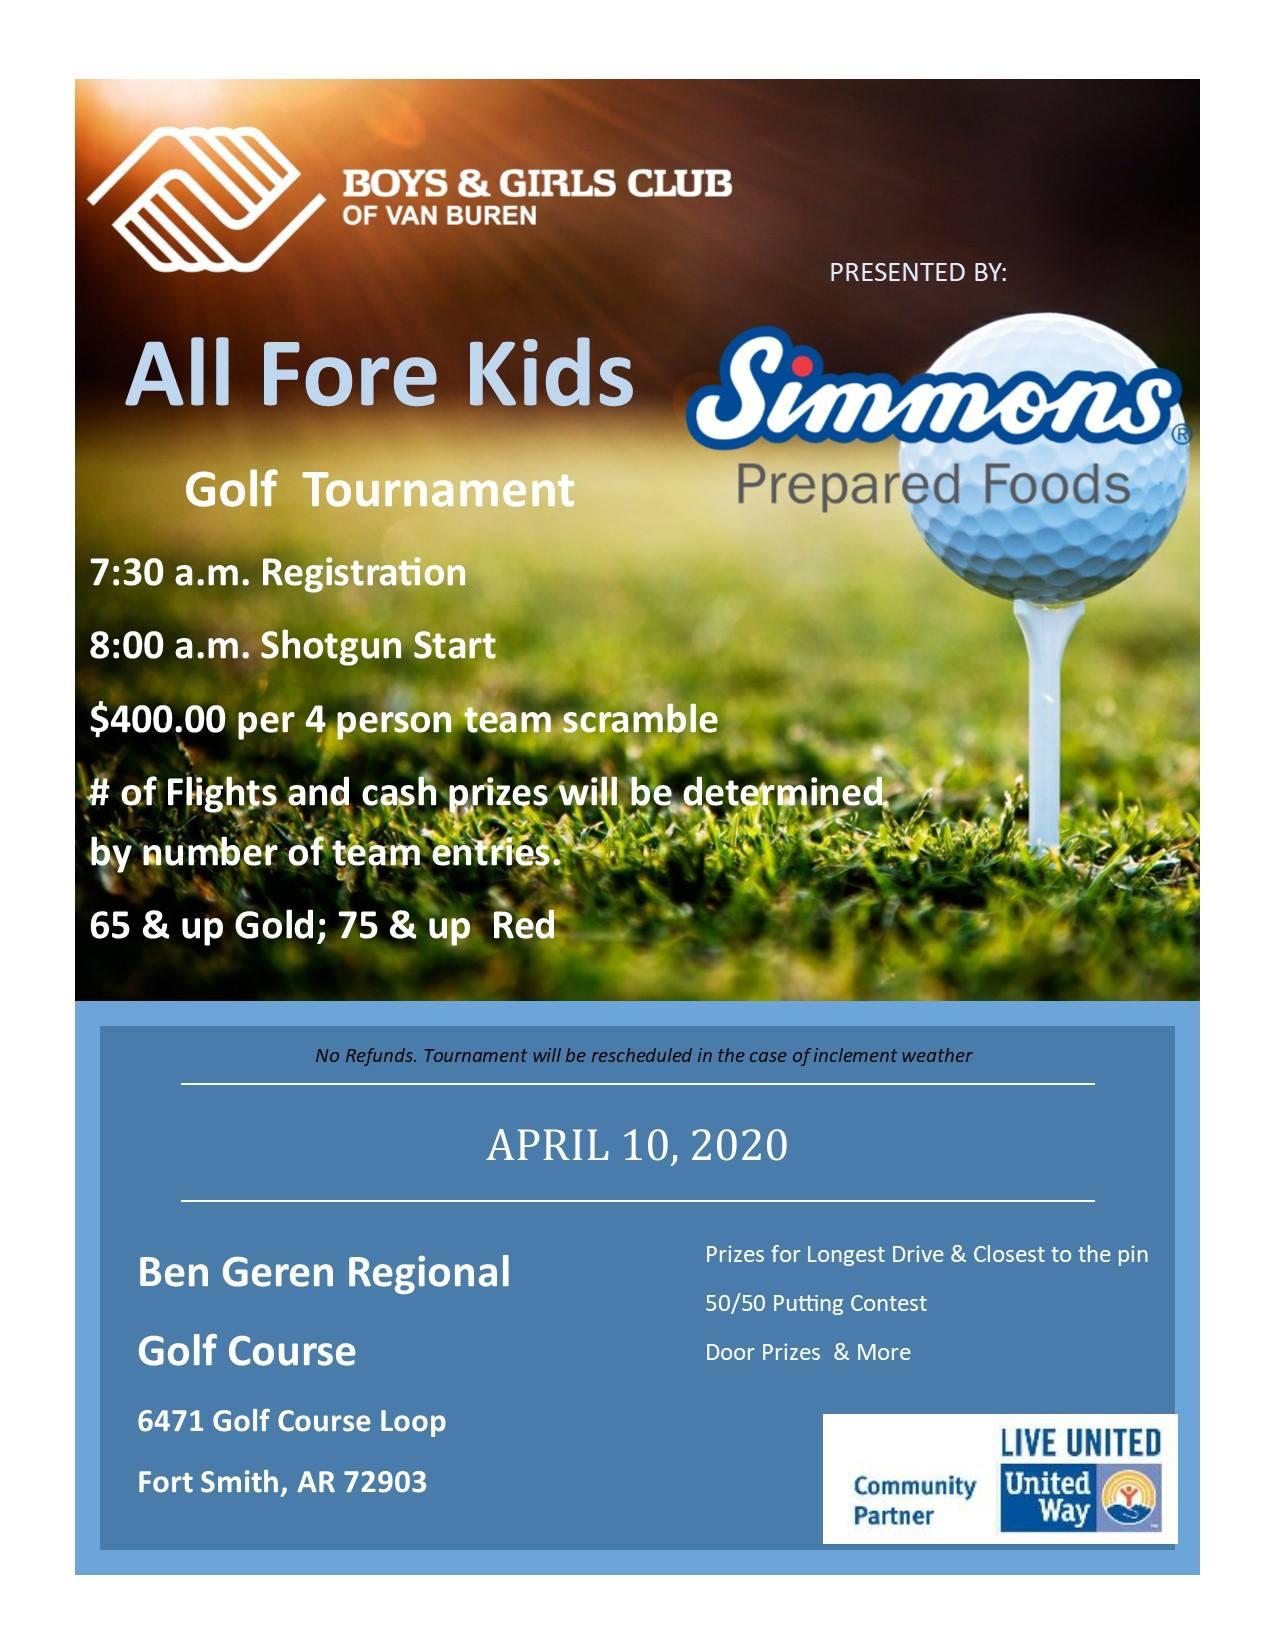 All Fore Kids Golf Tournament